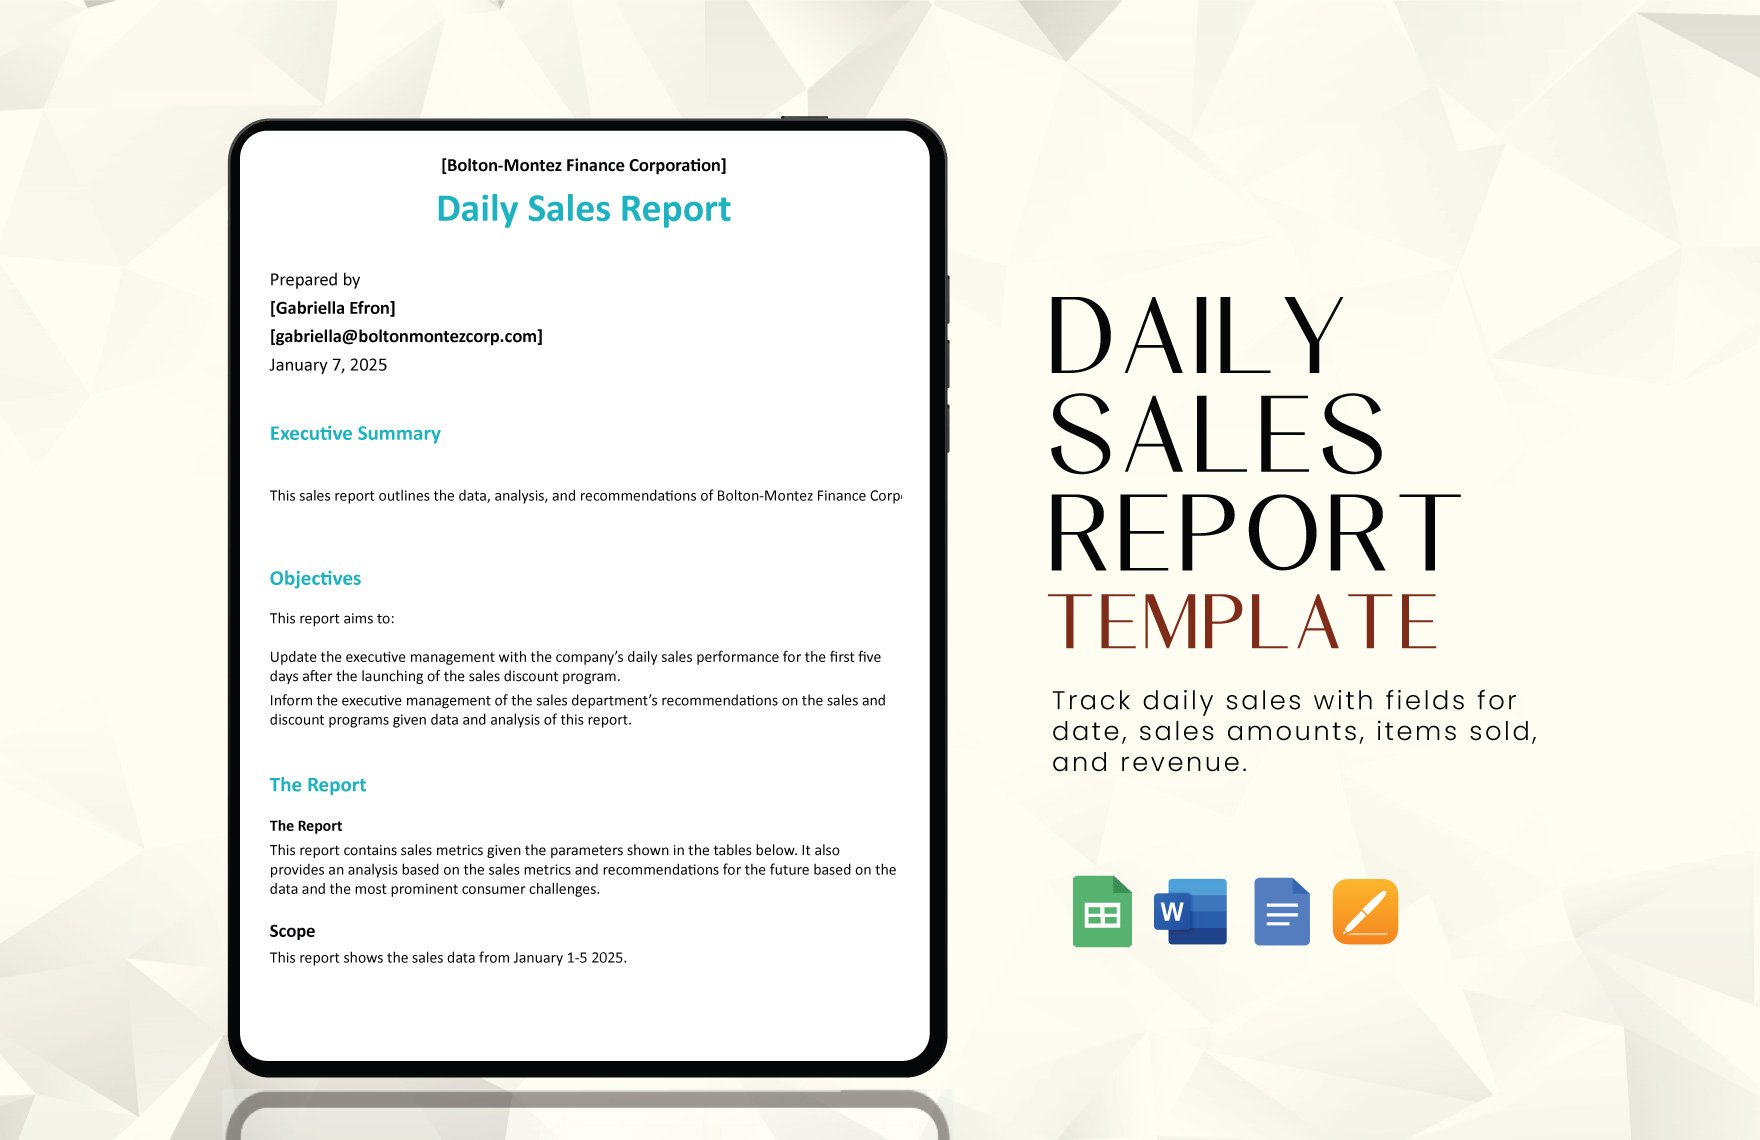 Free Daily Sales Report Template in Word, Google Docs, Google Sheets, Apple Pages